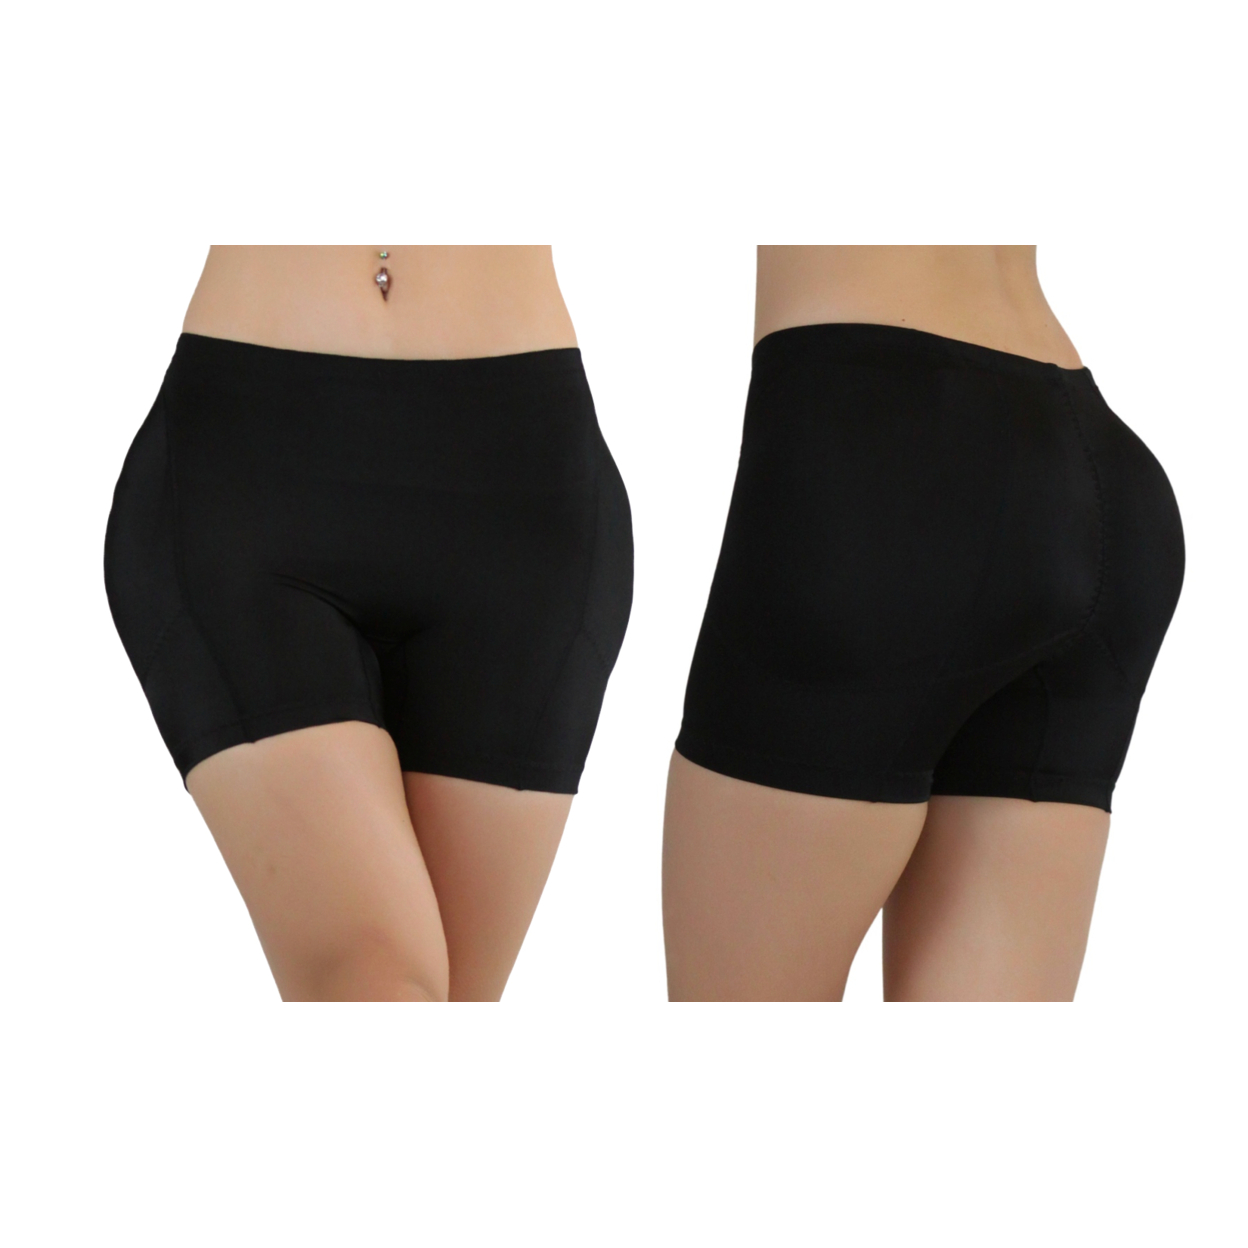 1 Or 2 Pack Of Women Butt And Hip Padded Shaper - Black, 2X